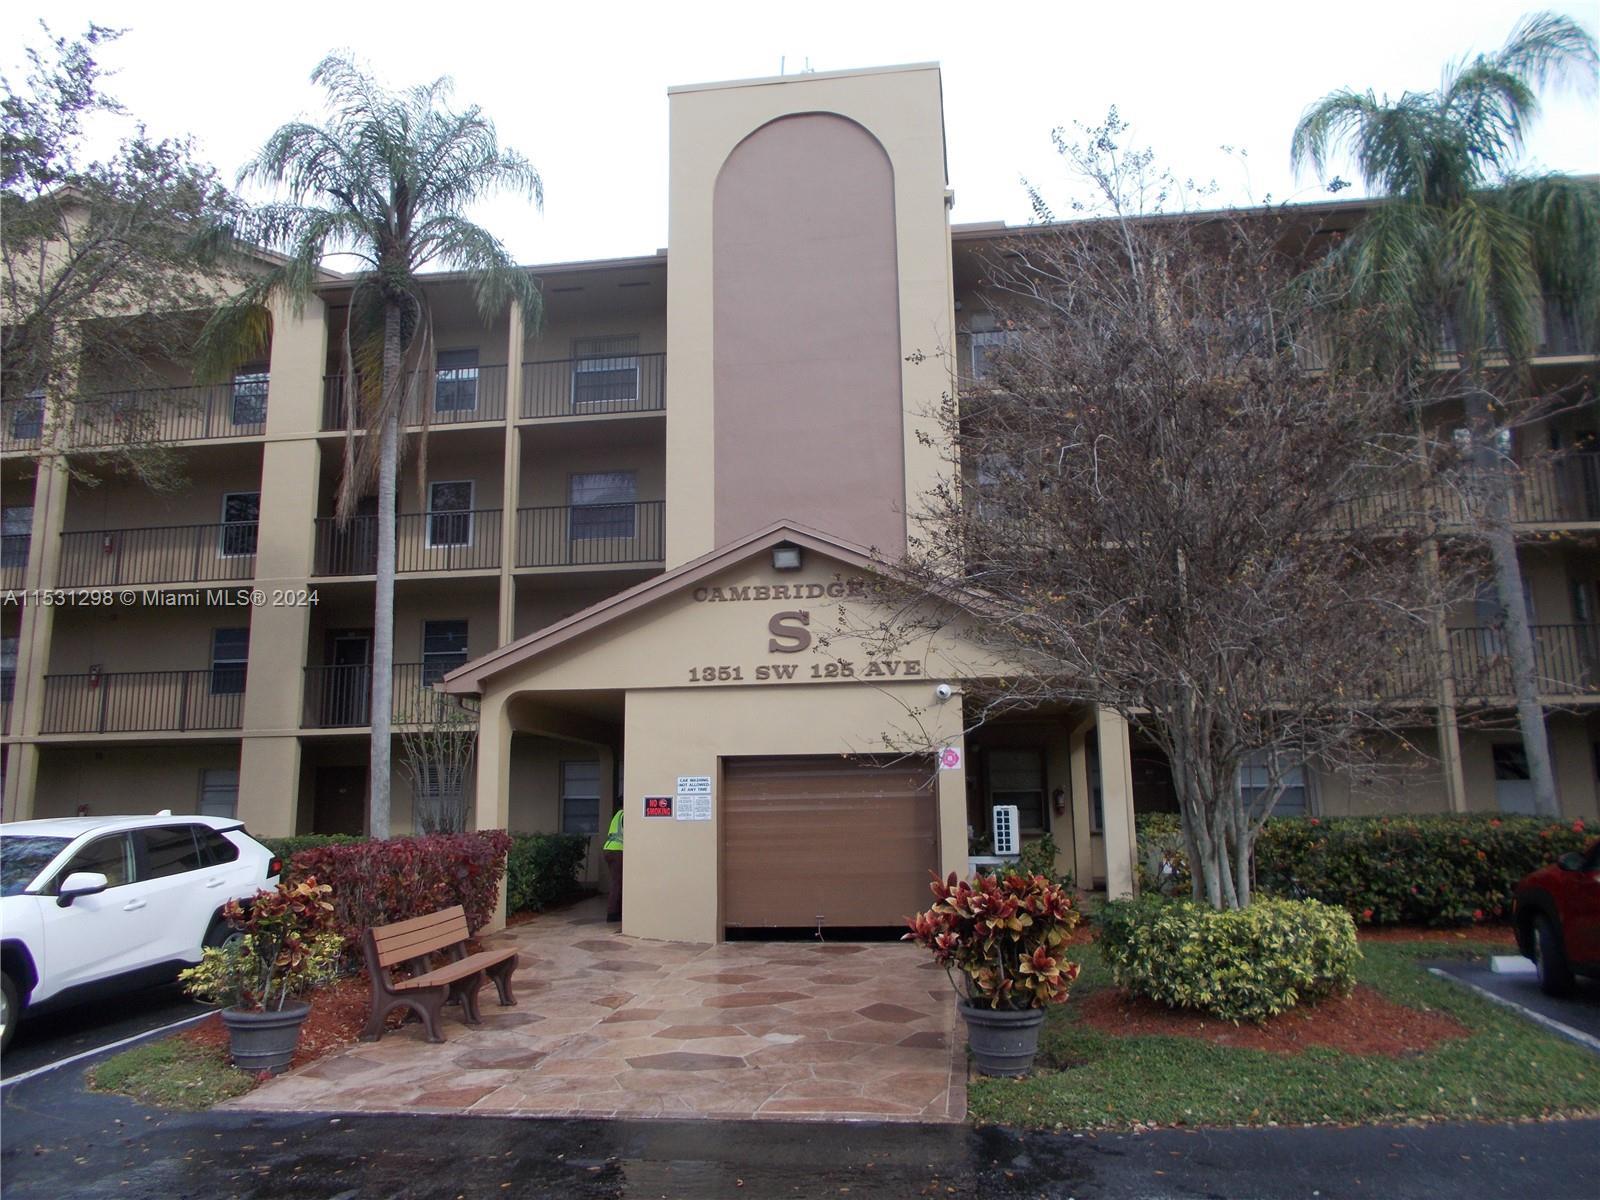 Photo of 1351 SW 125th Ave #404S in Pembroke Pines, FL